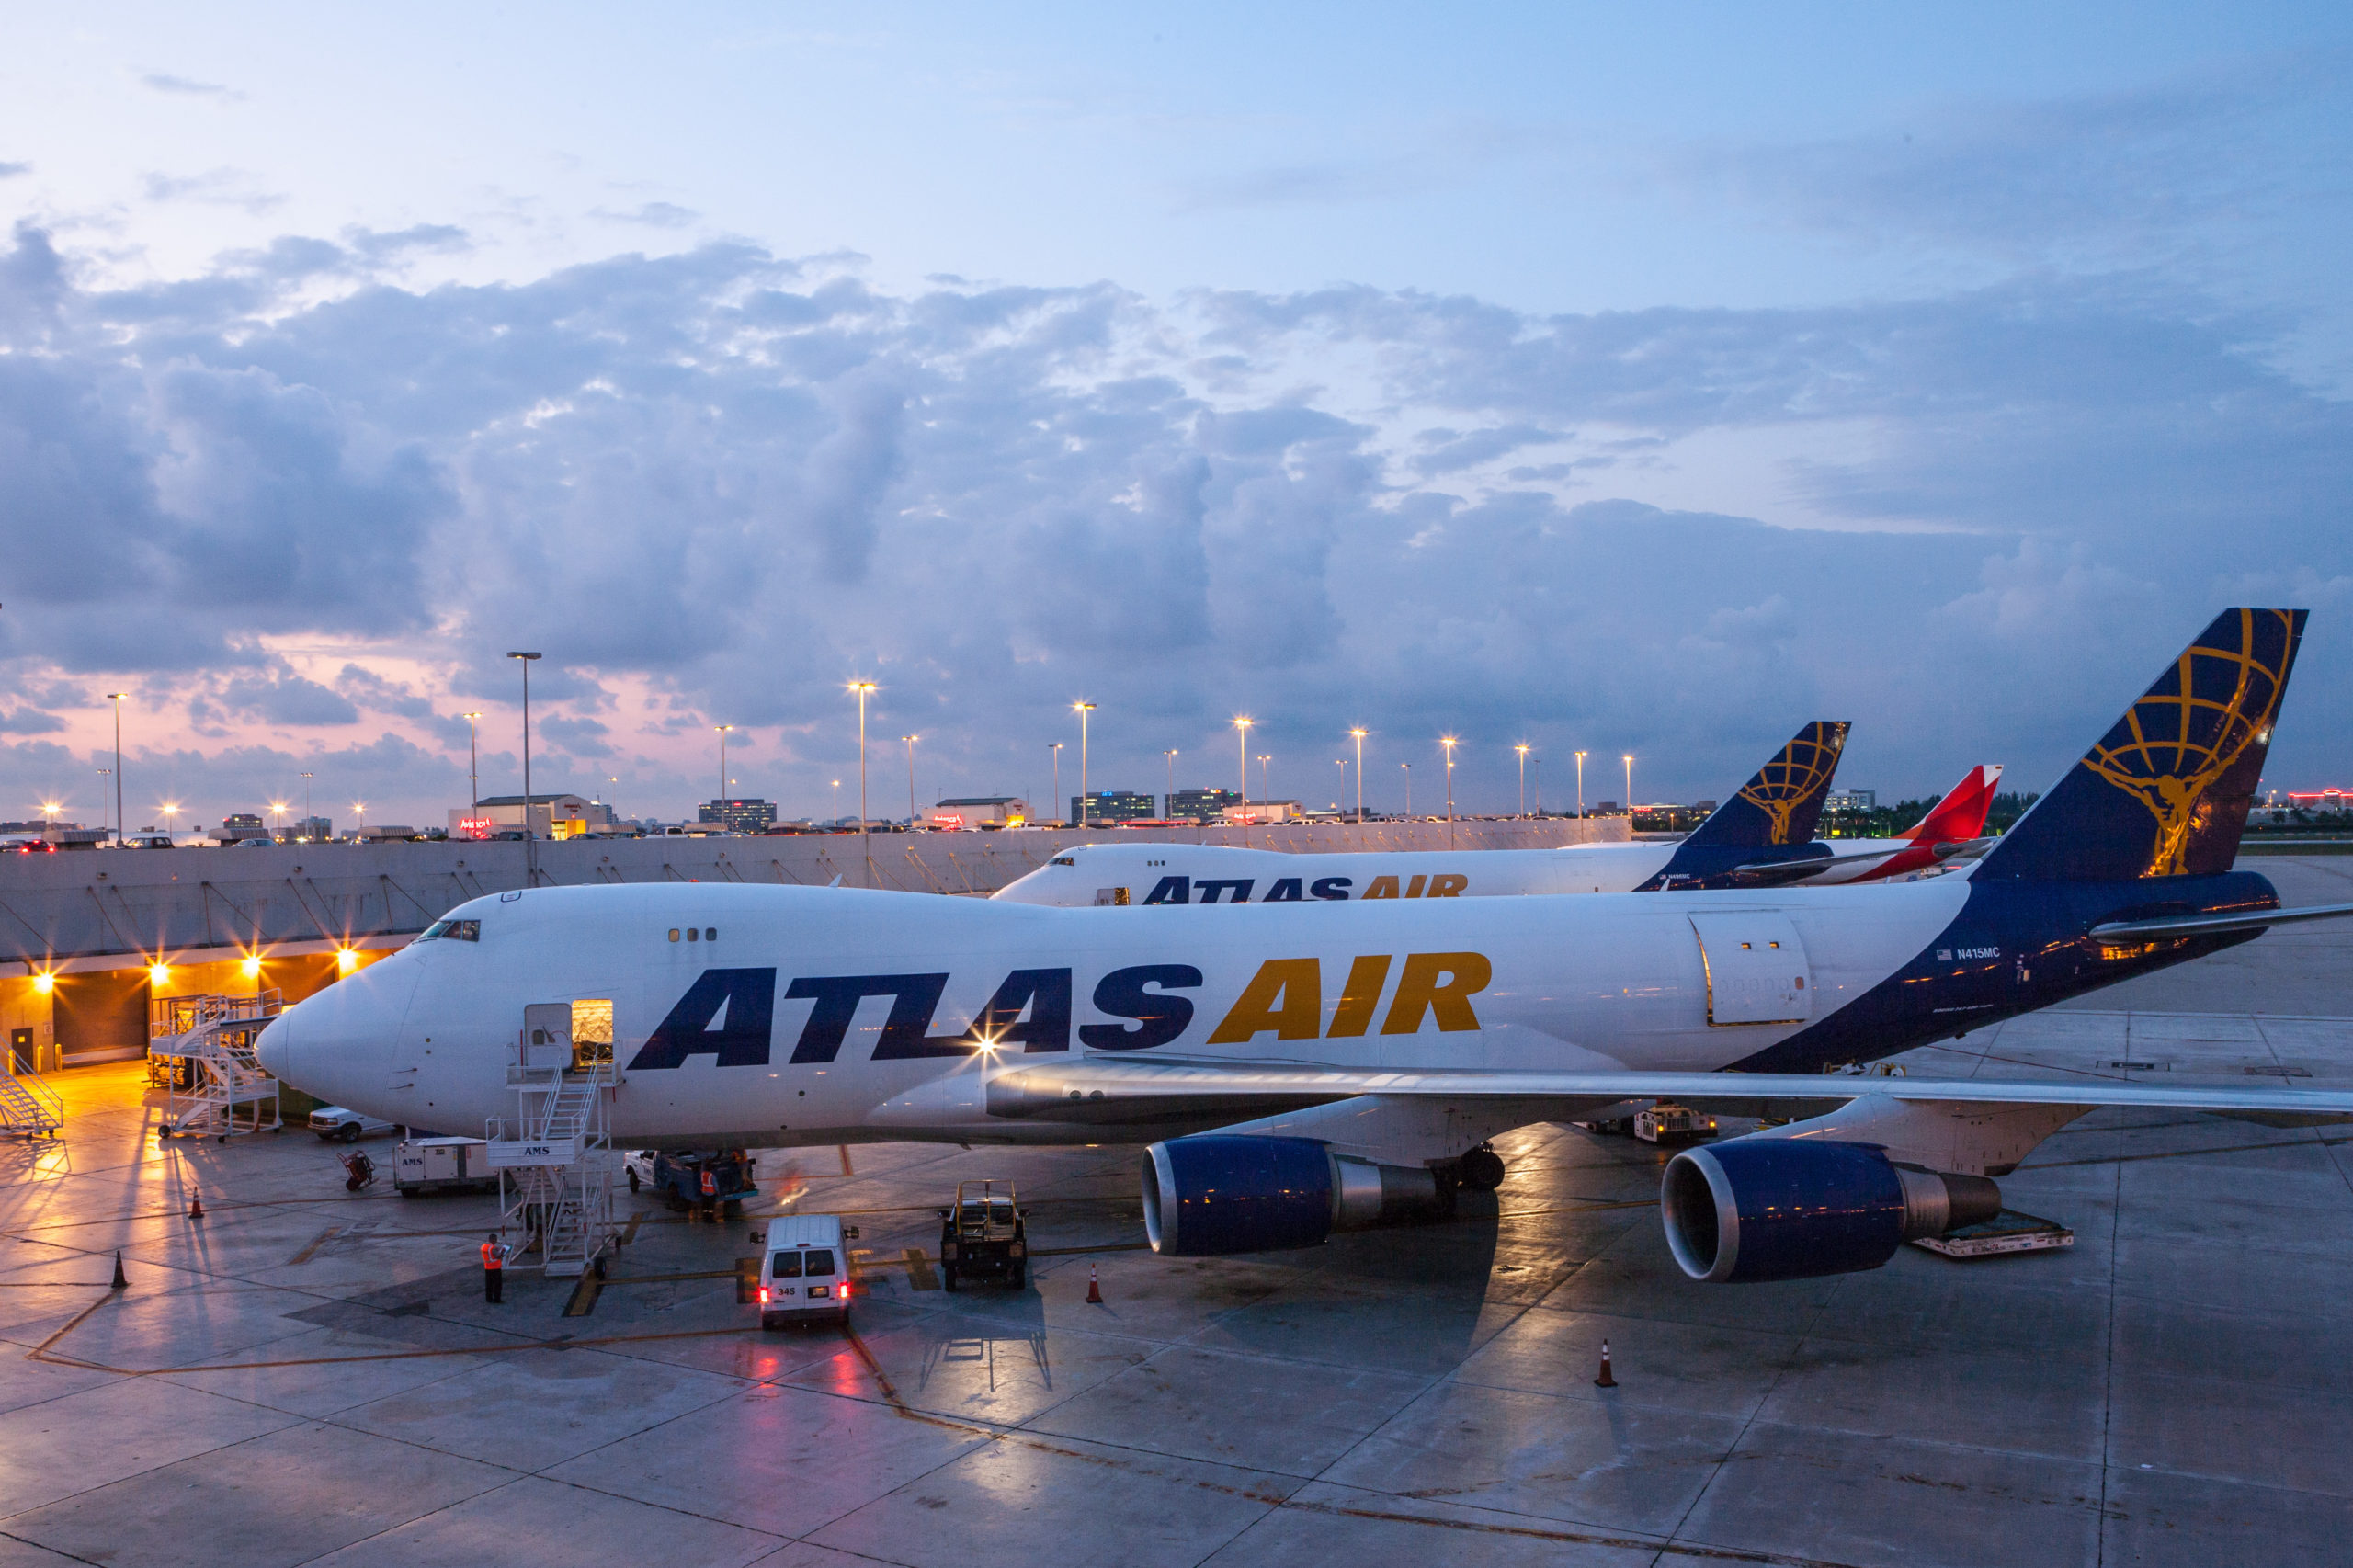 Atlas Air and All Nippon Airways begin a route between NRT and ORD on Oct. 2. Photo courtesy of Atlas Air.